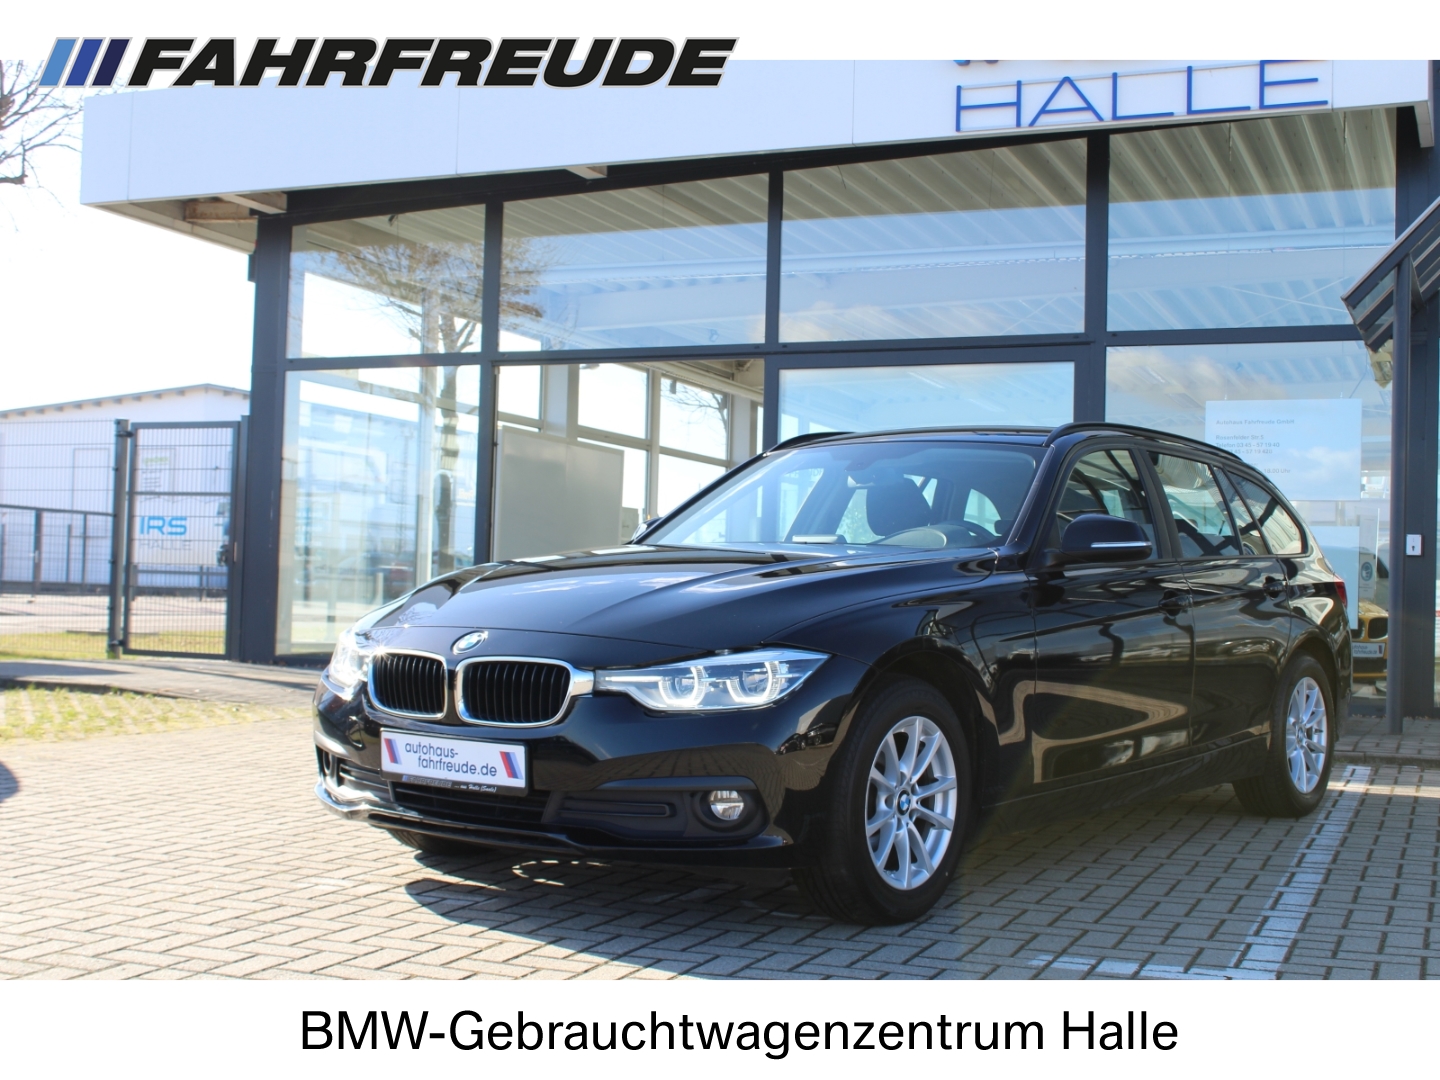 Used Bmw cars Germany to 30,000 EUR